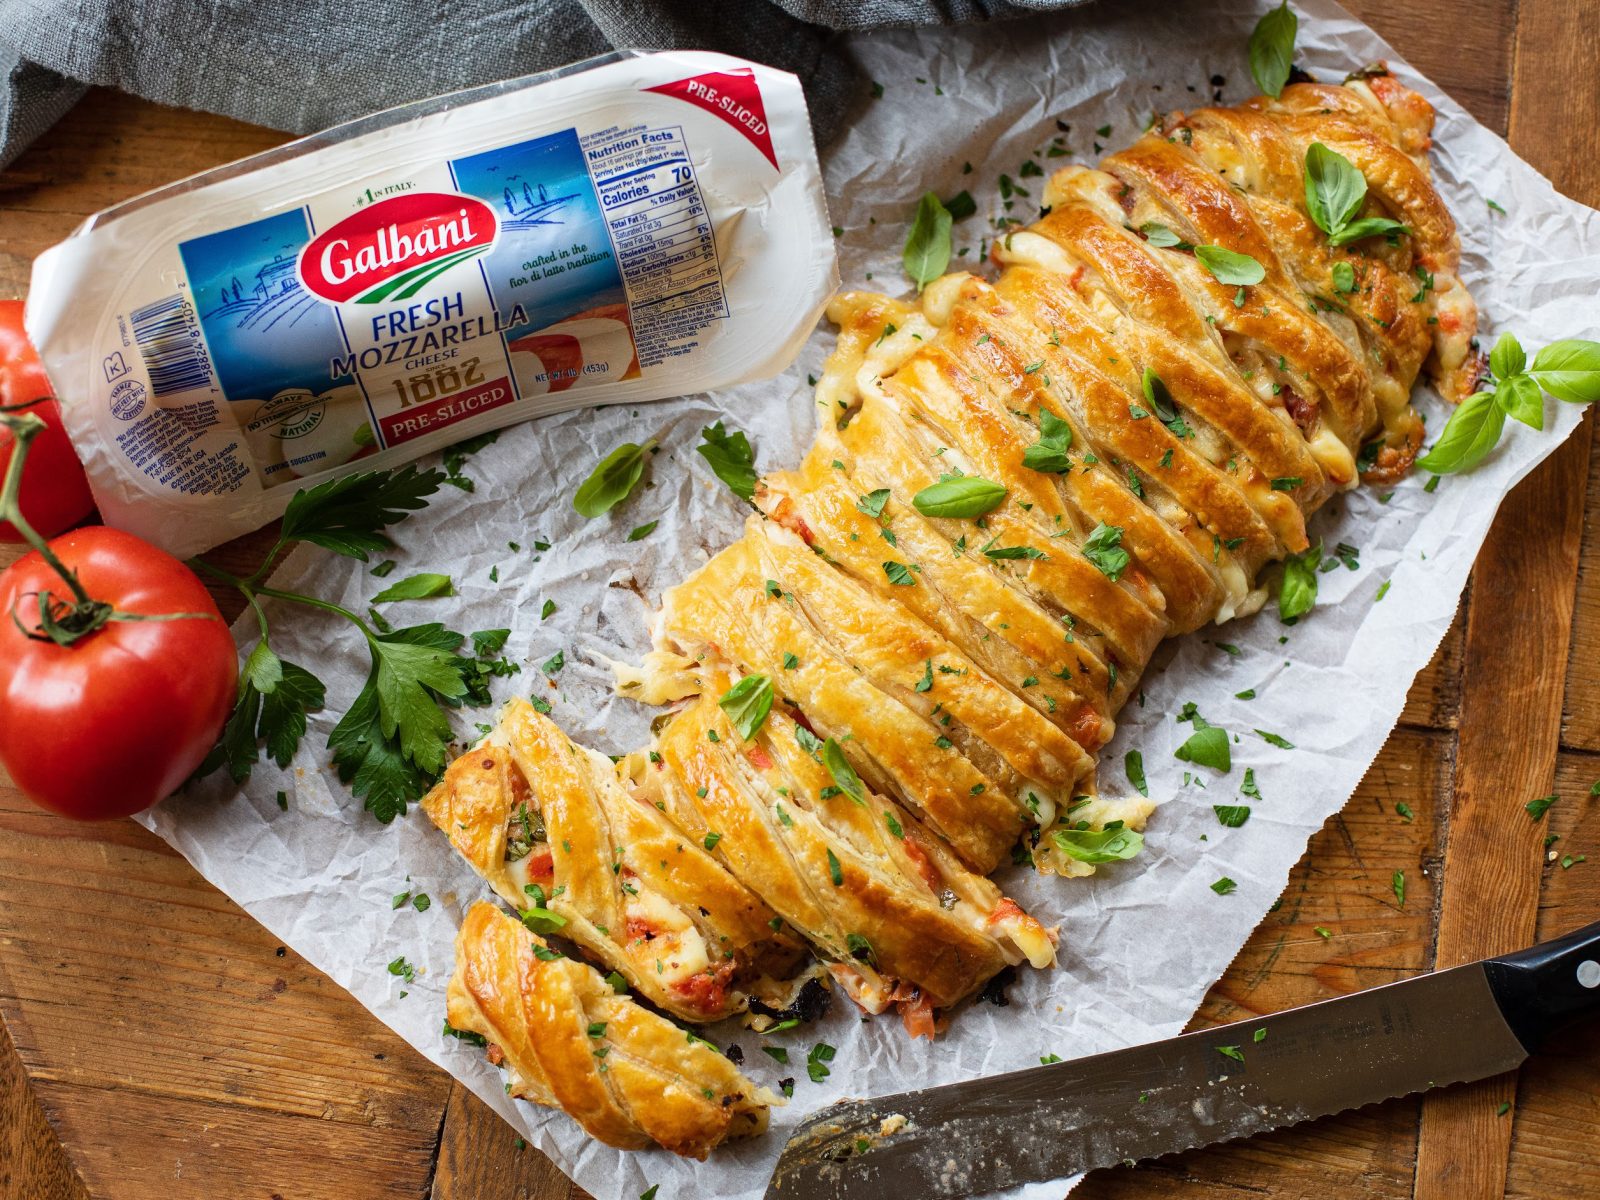 Visit The Specialty Cheese Section At The Publix Deli For Delicious Galbani Cheese & Try This Caprese Strudel Recipe